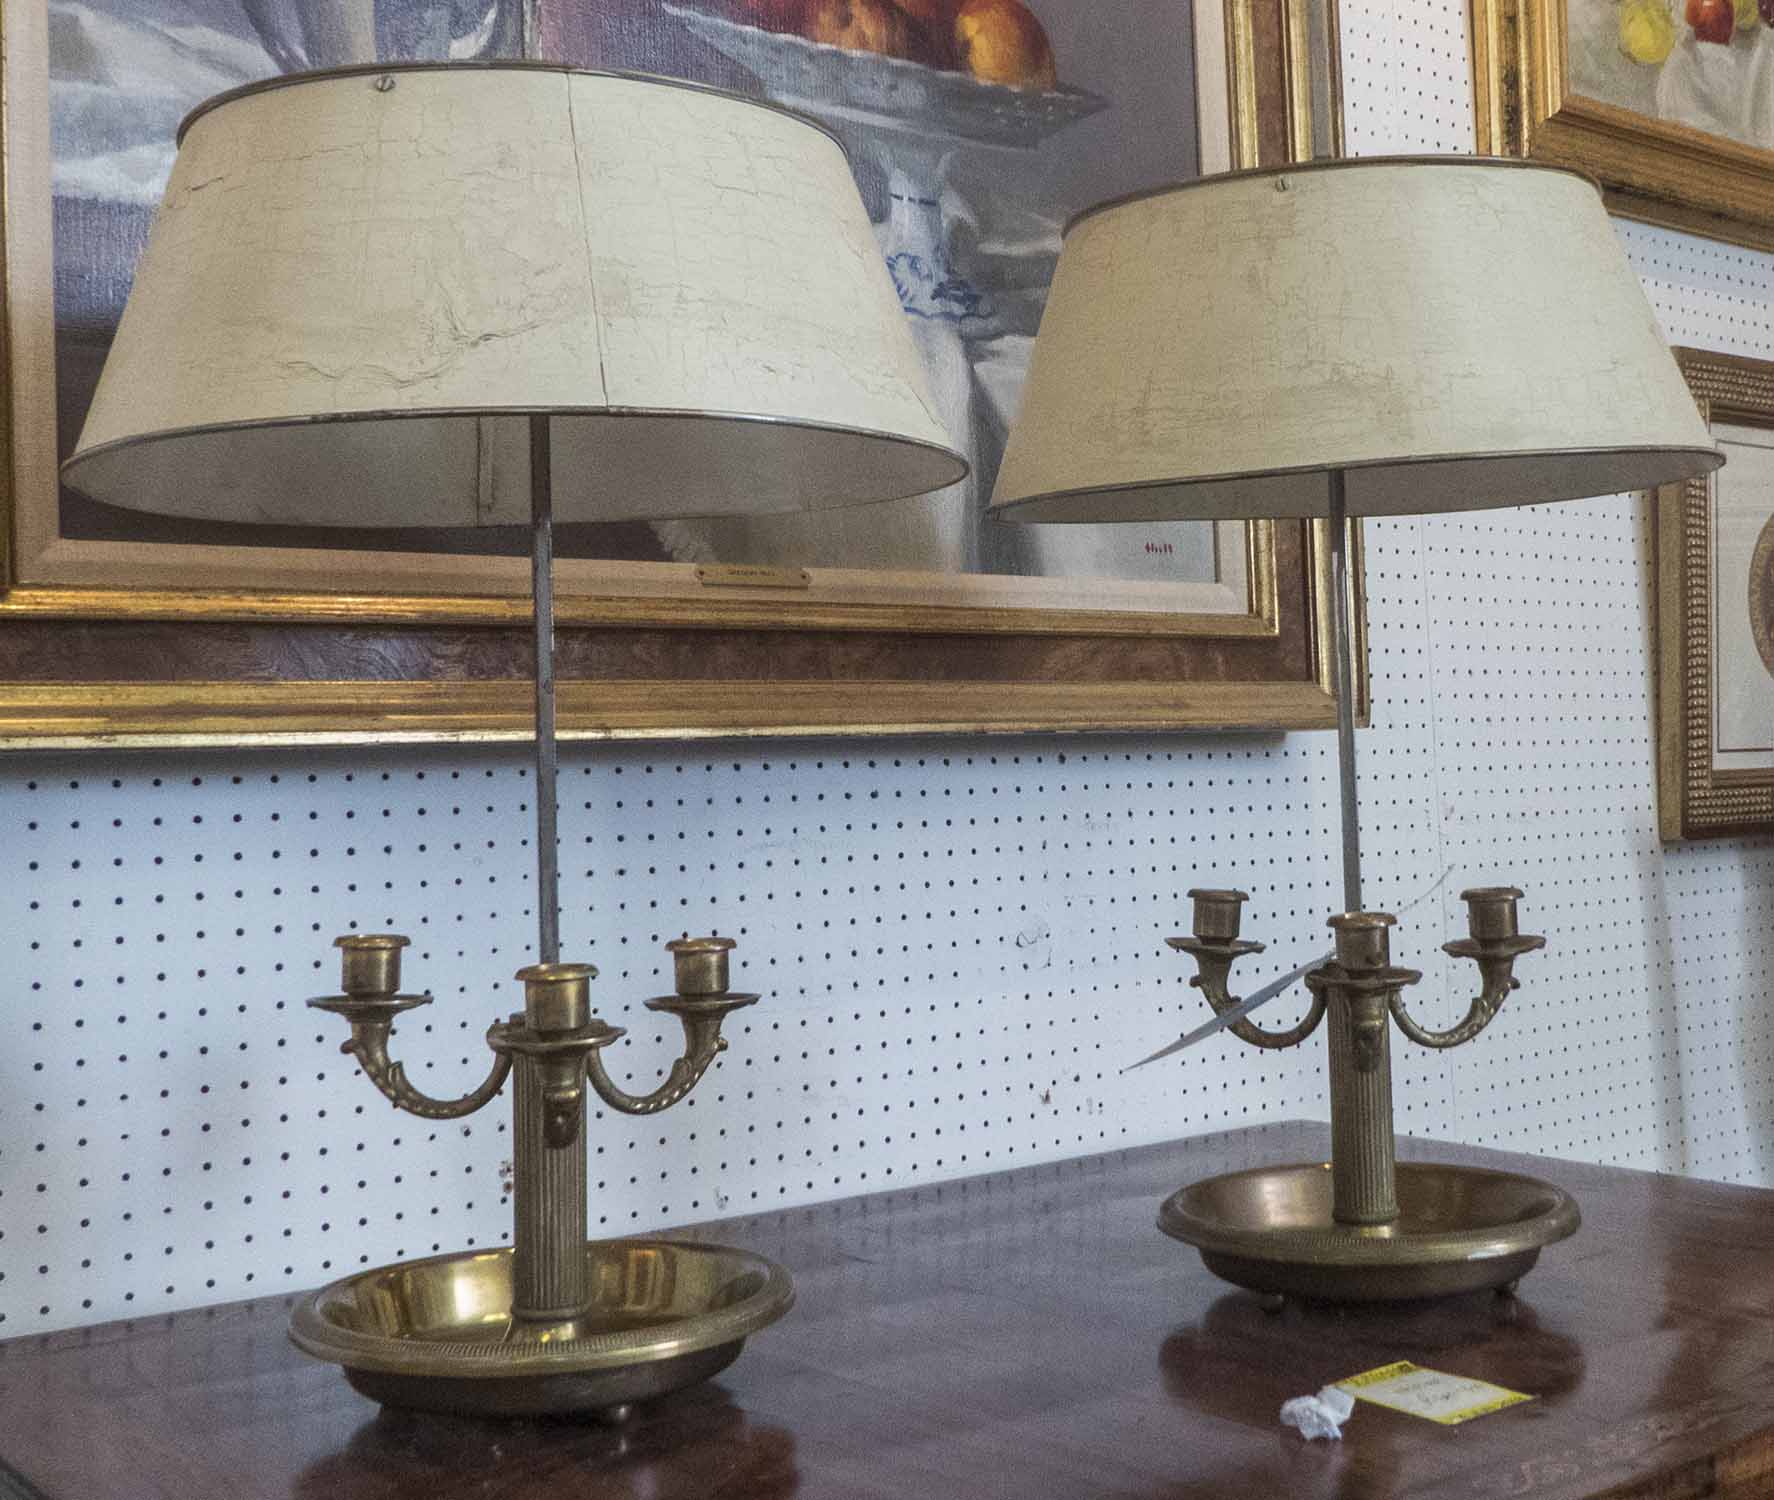 BOUILOTTE LAMPS, a pair, 1930's French brass, with cream painted tole shades, 73cm H x 36cm W.